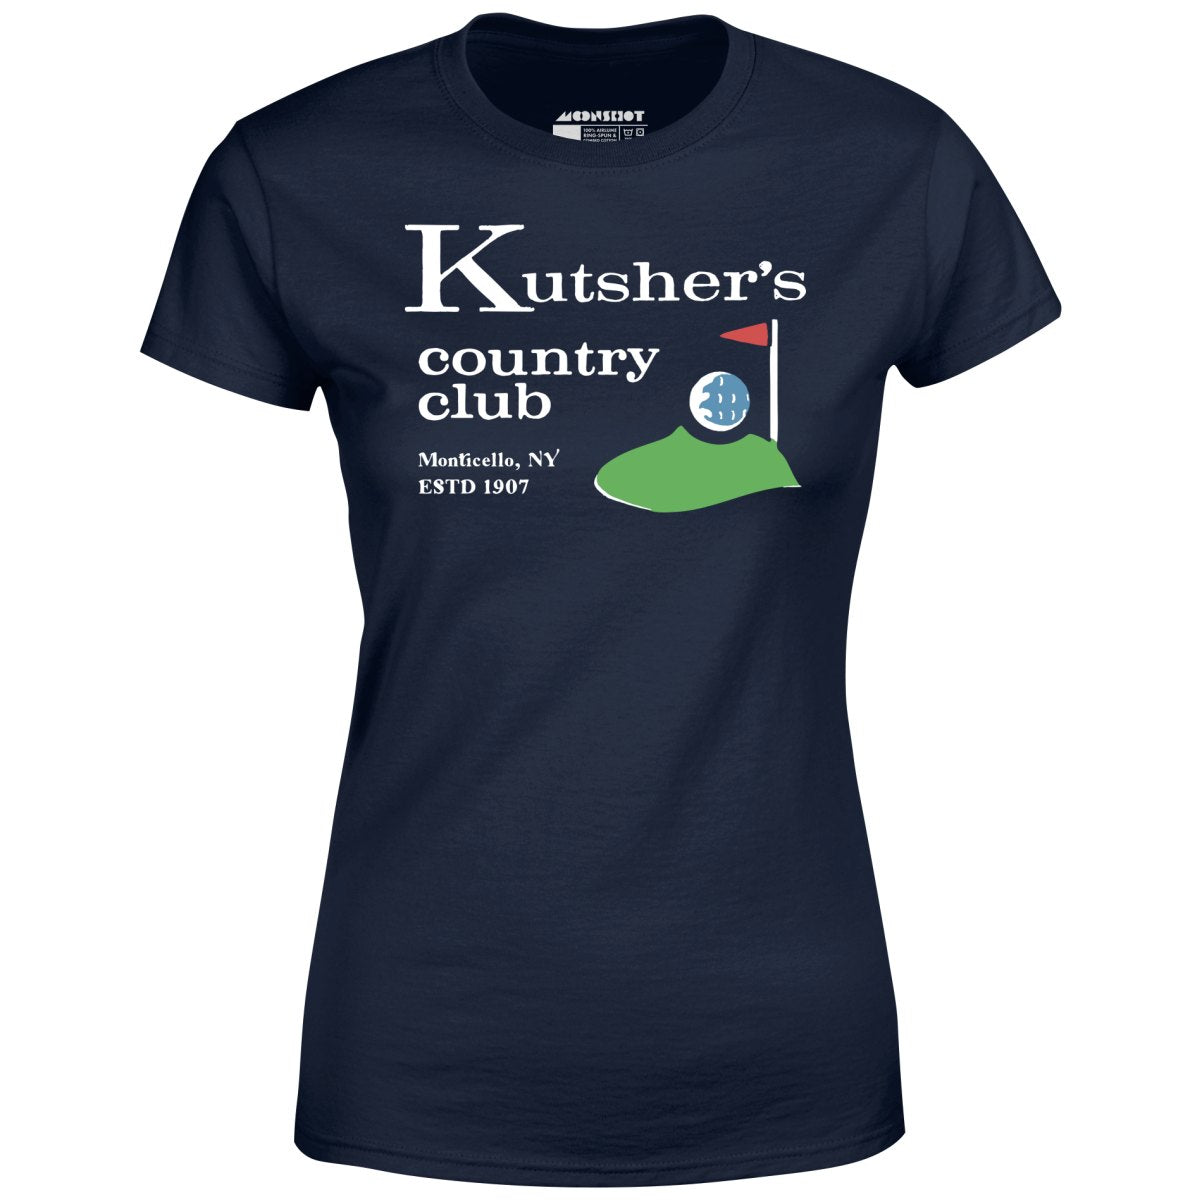 Kutsher's Country Club - Monticello, NY - Vintage Hotel - Women's T-Shirt